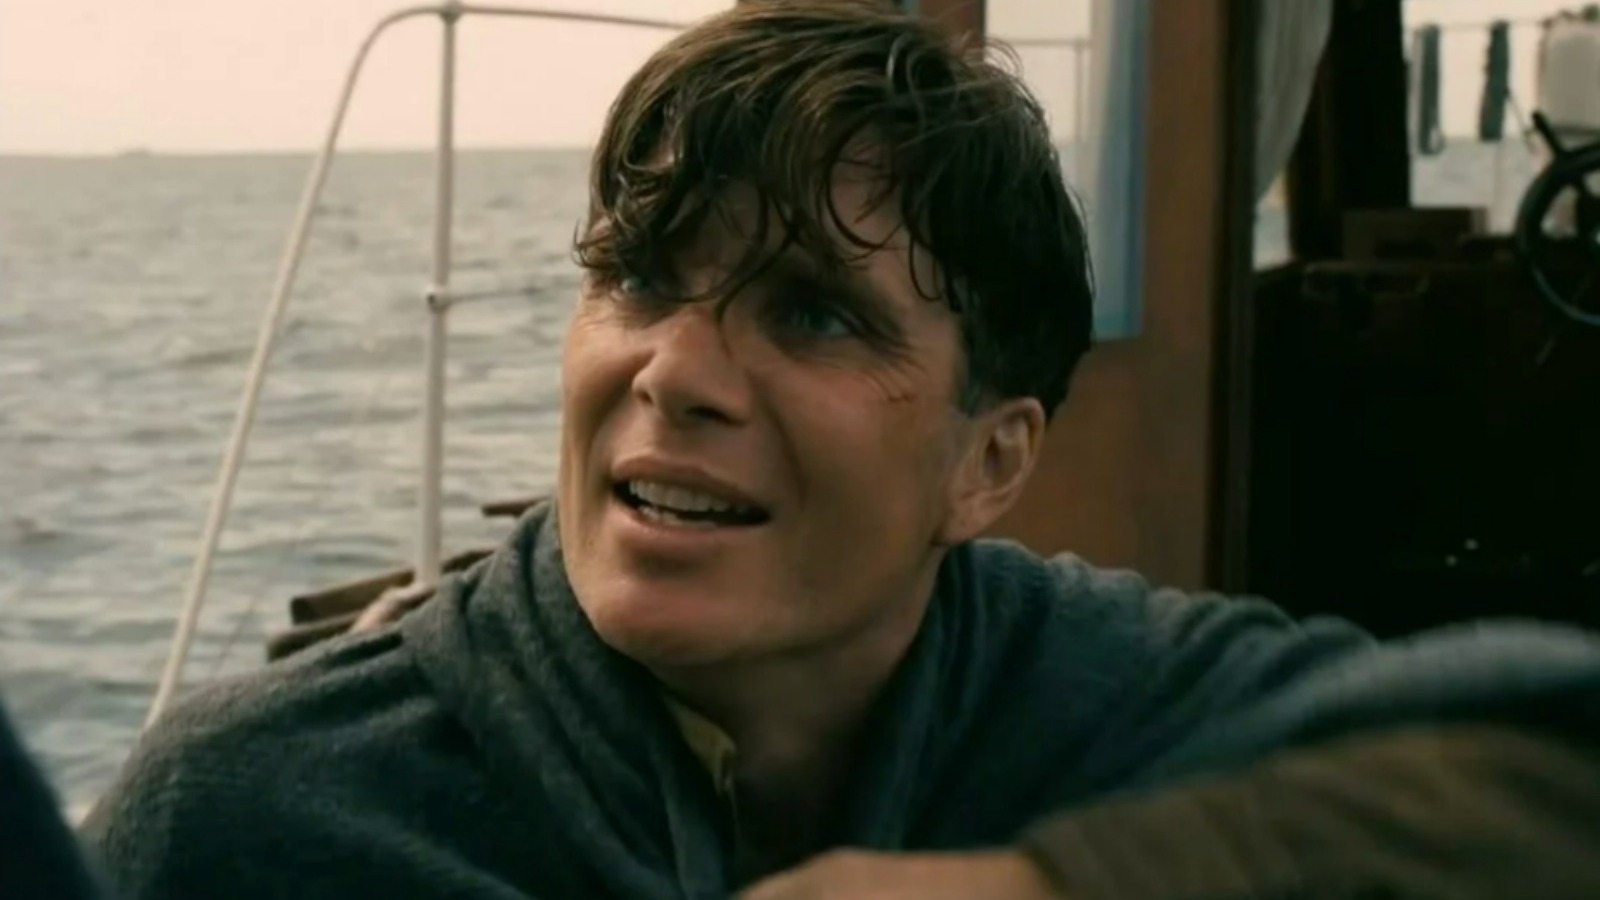 #Cillian Murphy Will Build The Atomic Bomb For Christopher Nolan